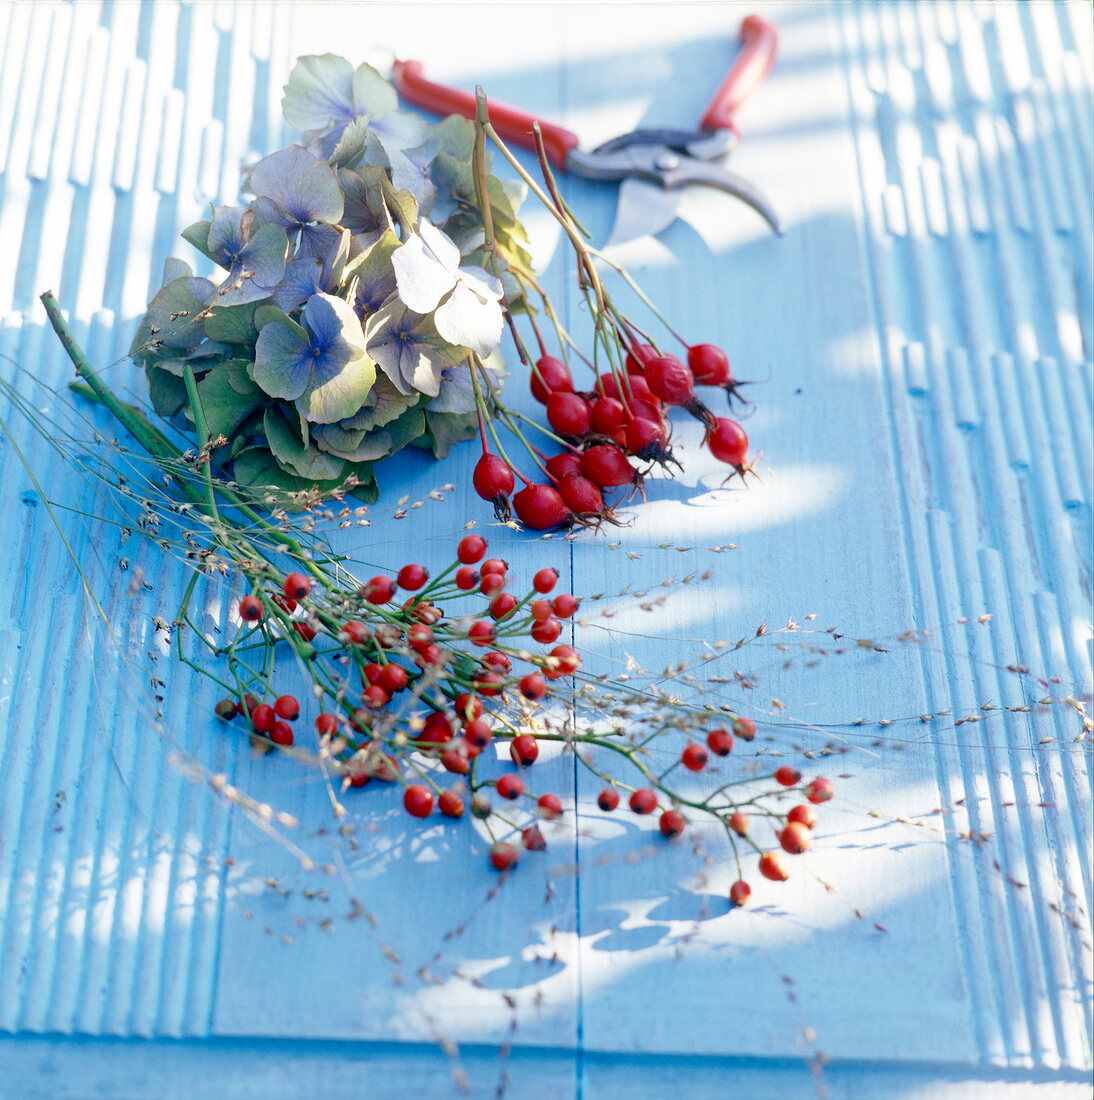 Rose hips with purple flowers and garden shears on blue background